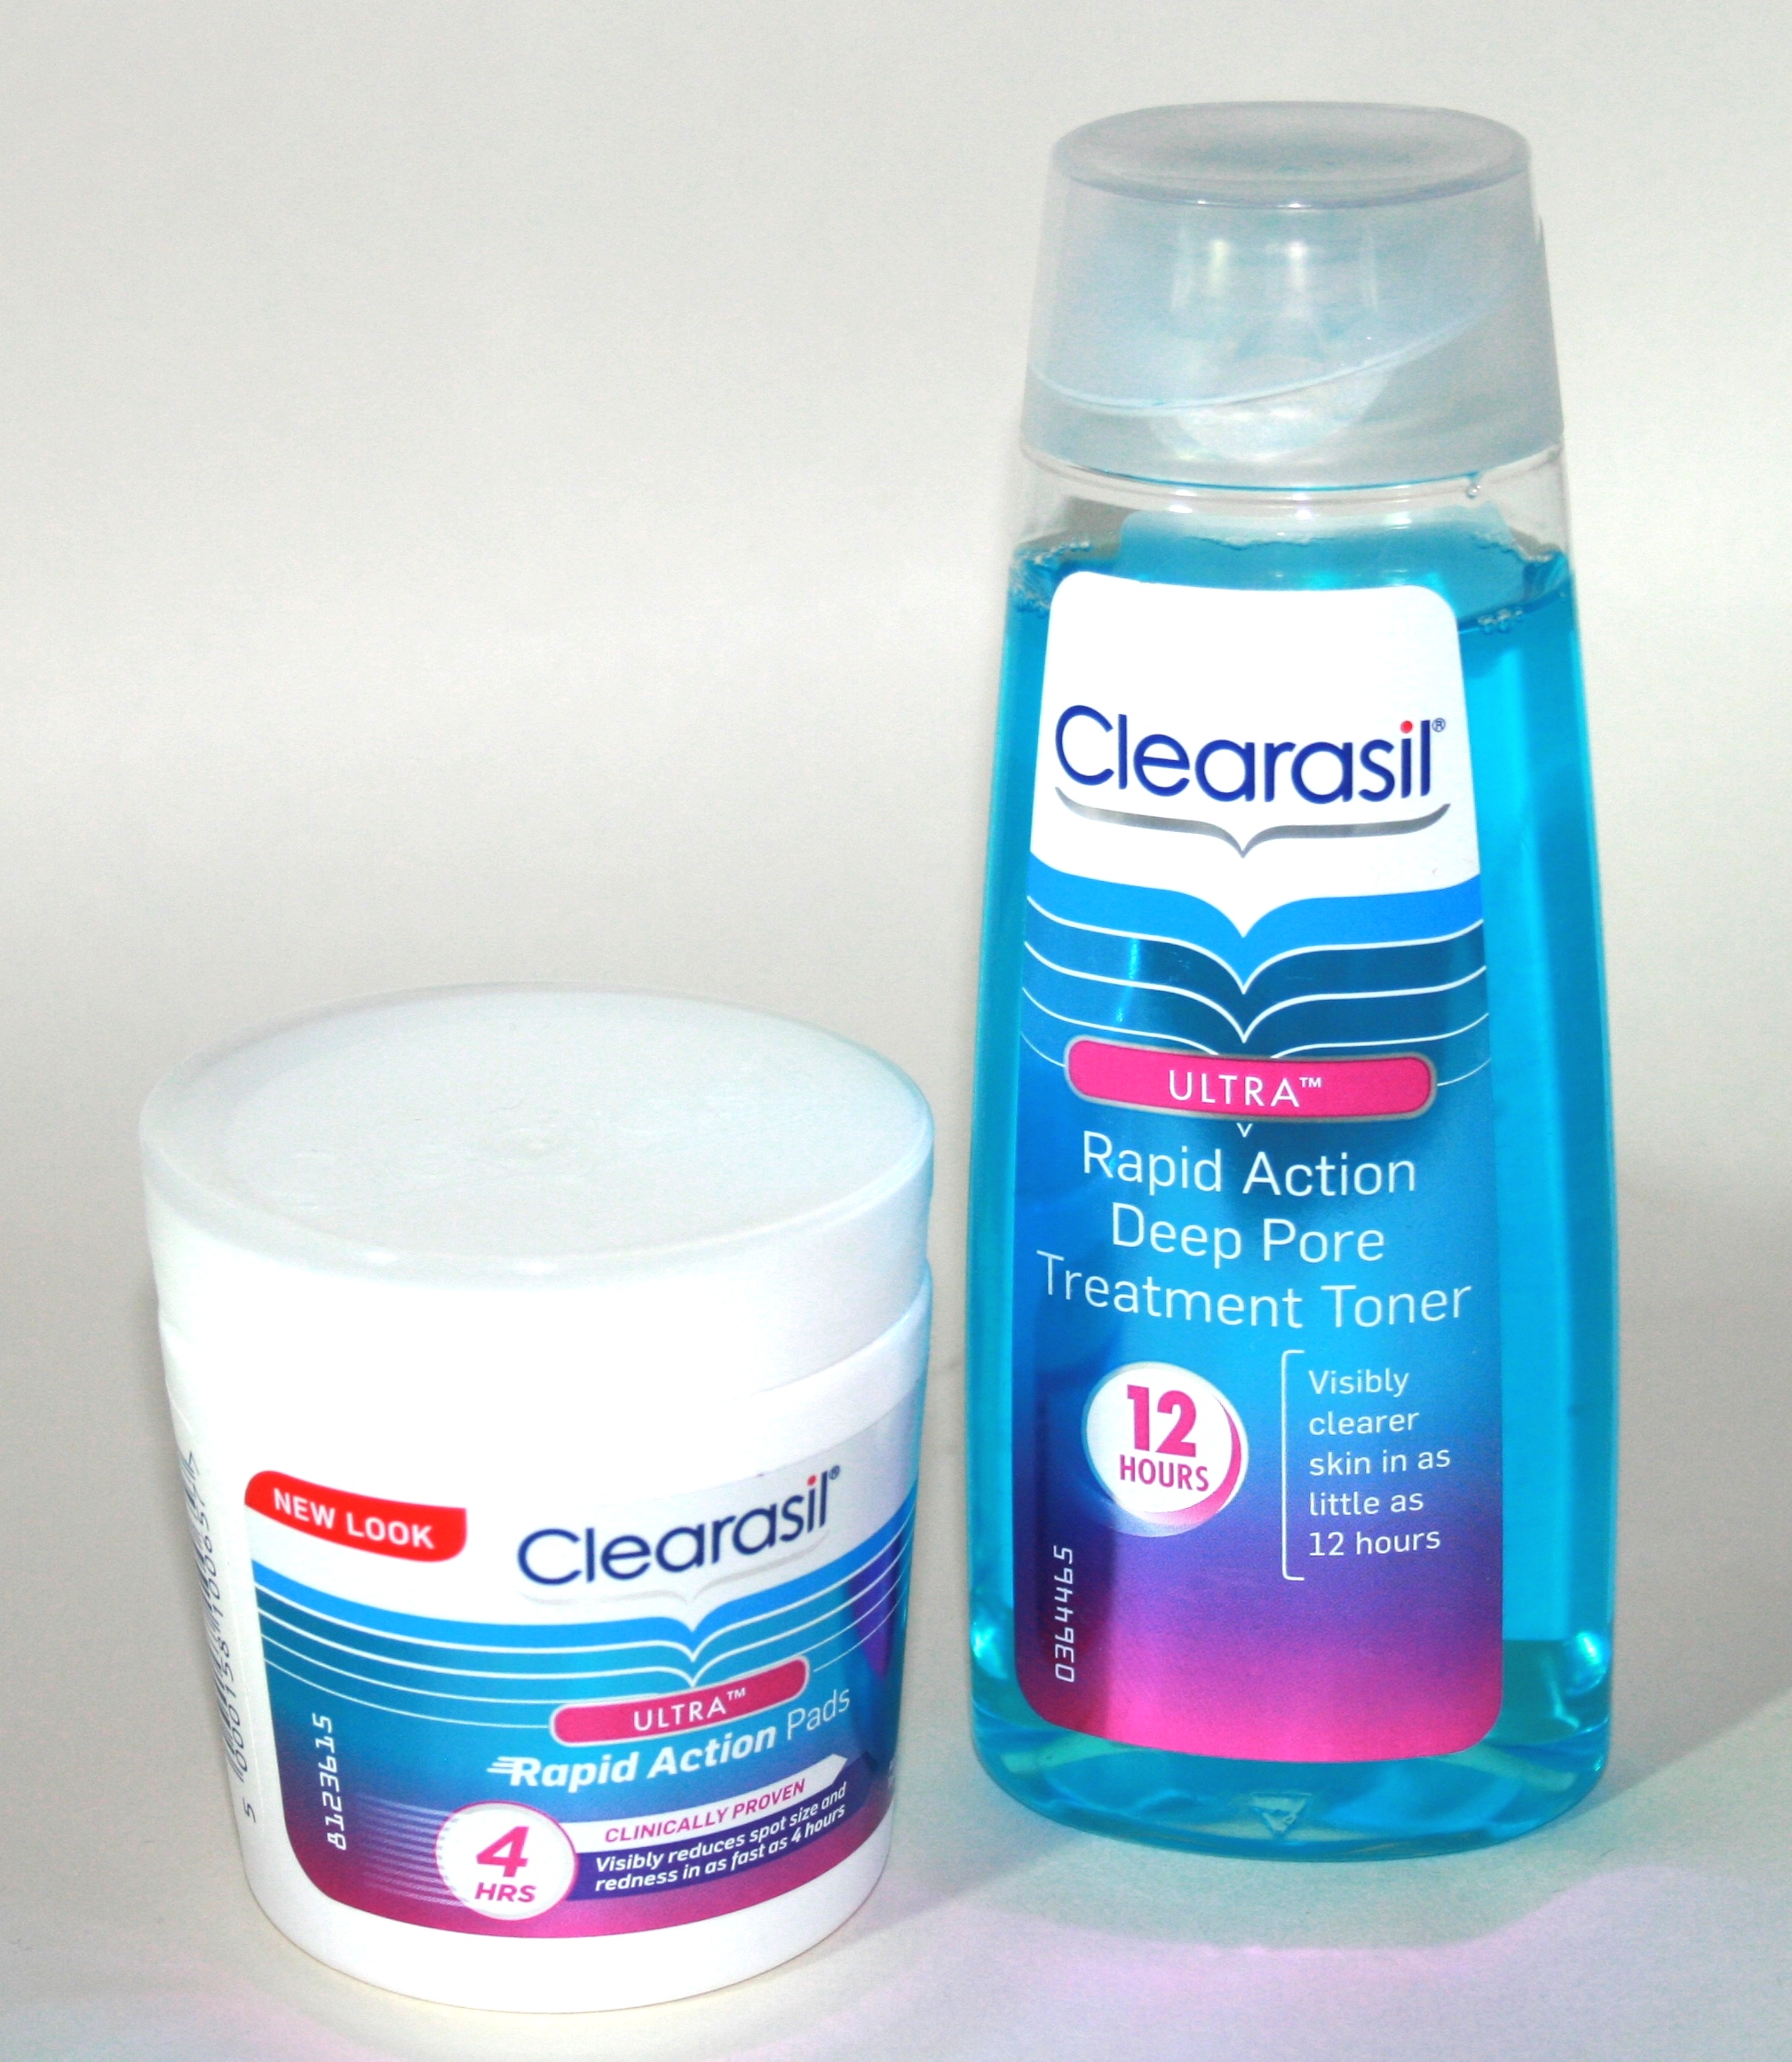 Clearasil Rapid Action Pads and Deep Pore Treatment Toner